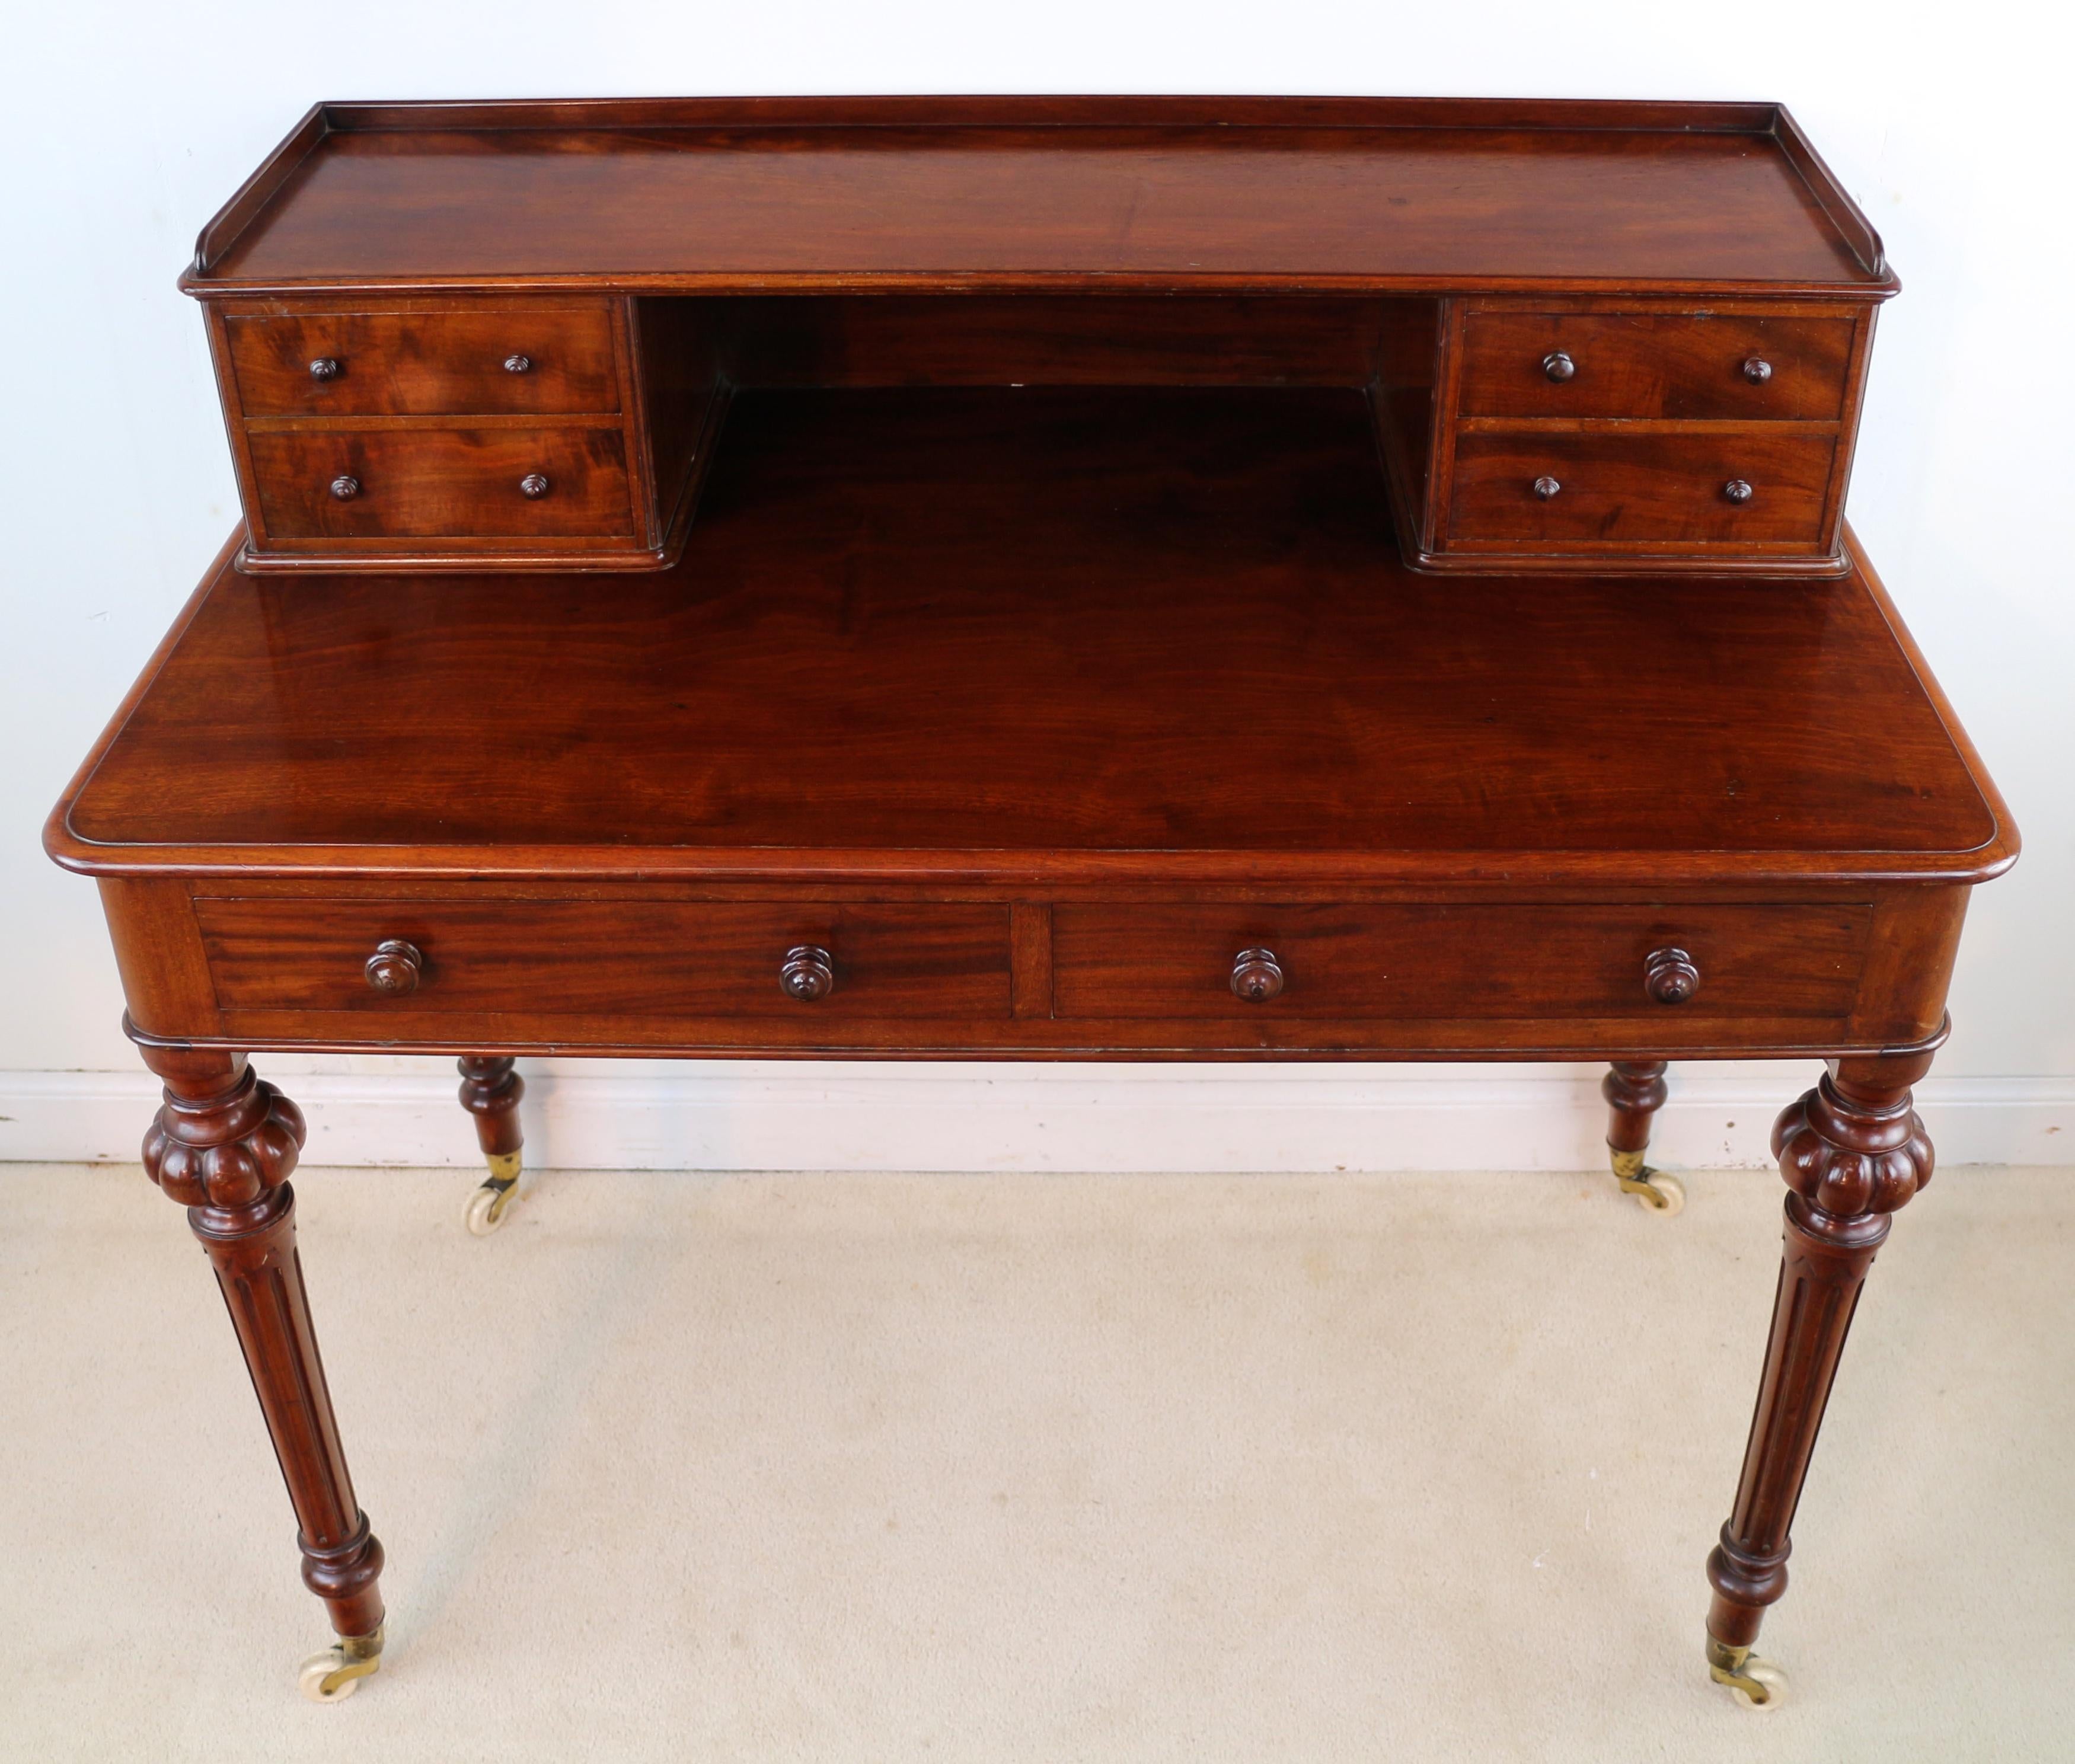 Antique English Victorian Mahogany Writing Table or Desk by Heal’s of London 2